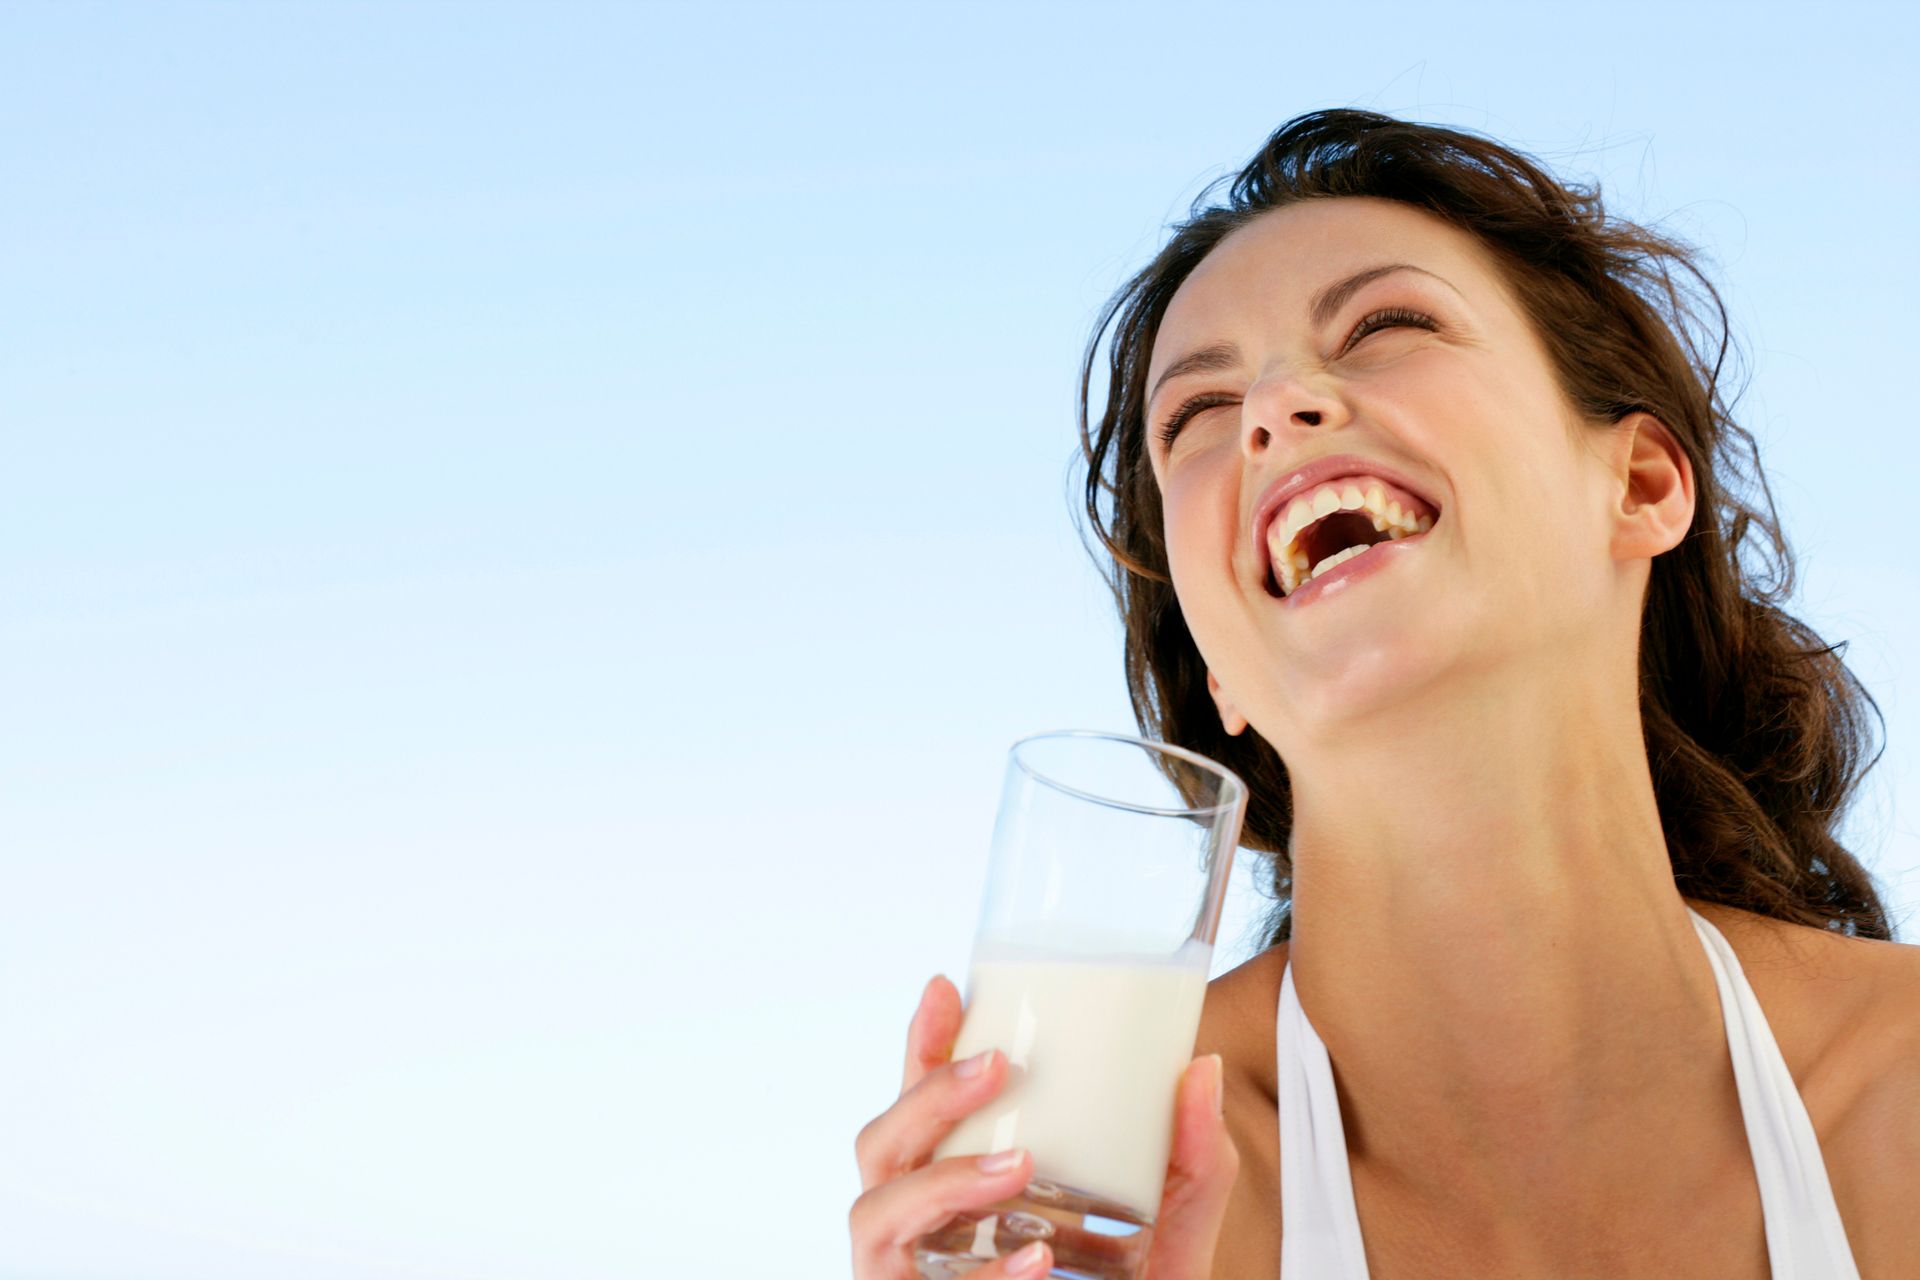 A woman is holding a glass of milk and laughing.